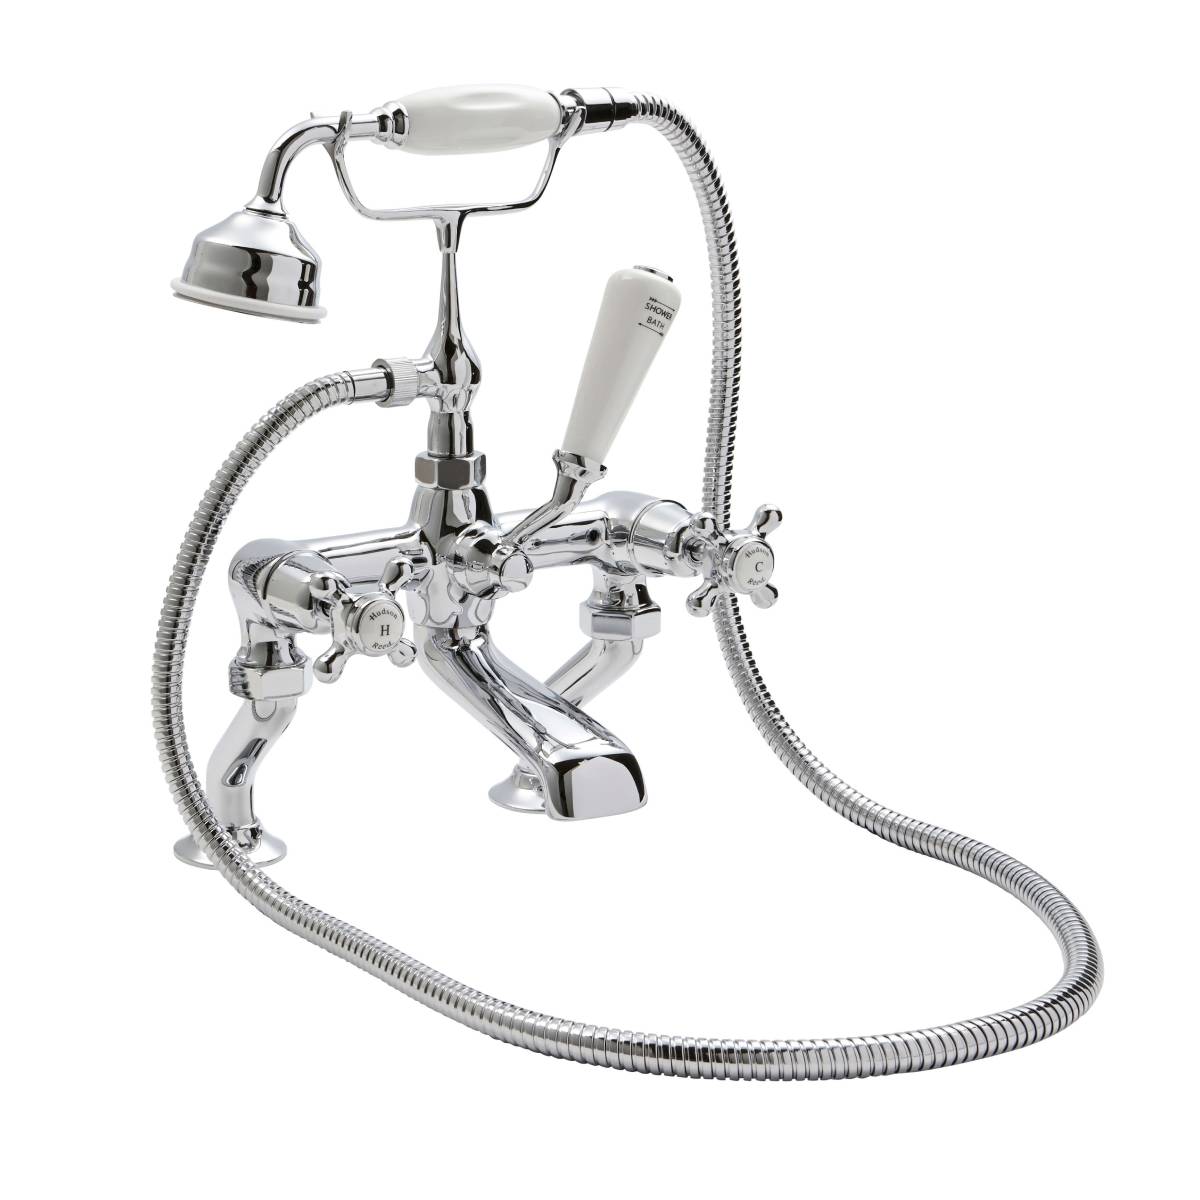 Hudson Reed Topaz with Crosshead Deck Mounted Bath Shower Mixer wiht Domed Collar - White BC304DX (2442)